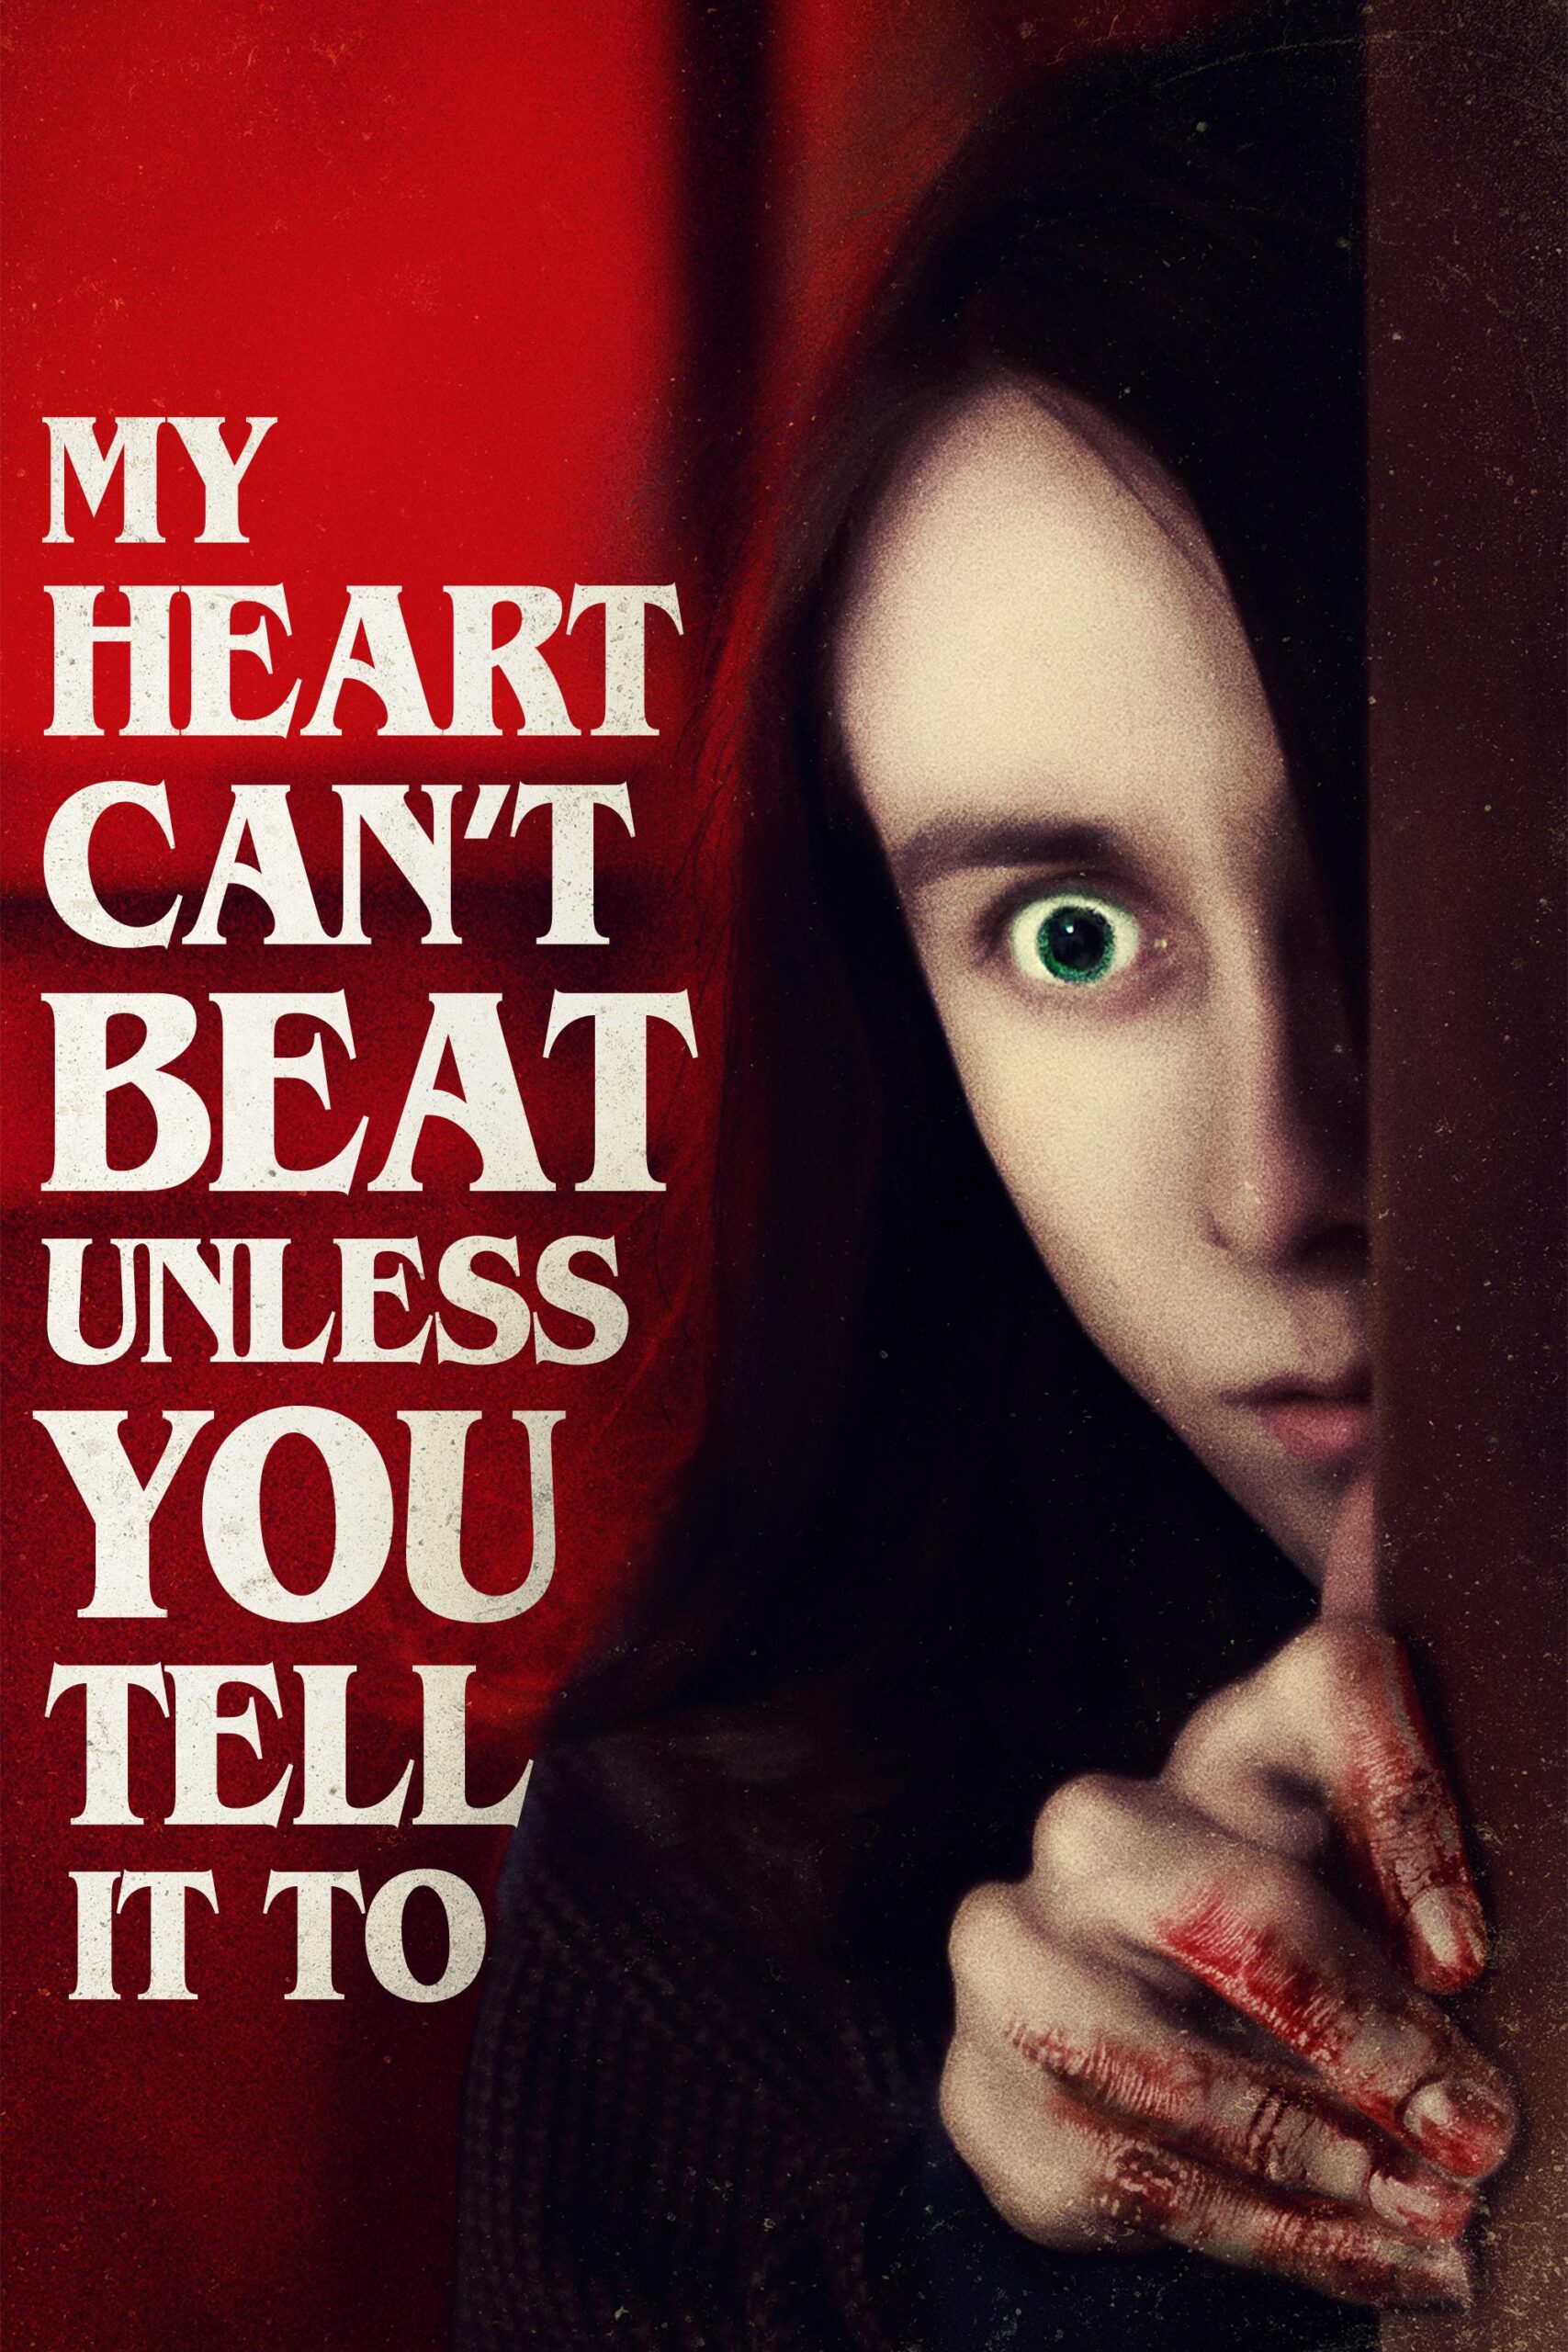 My Heart Won't Beat Unless You Tell it To trailer